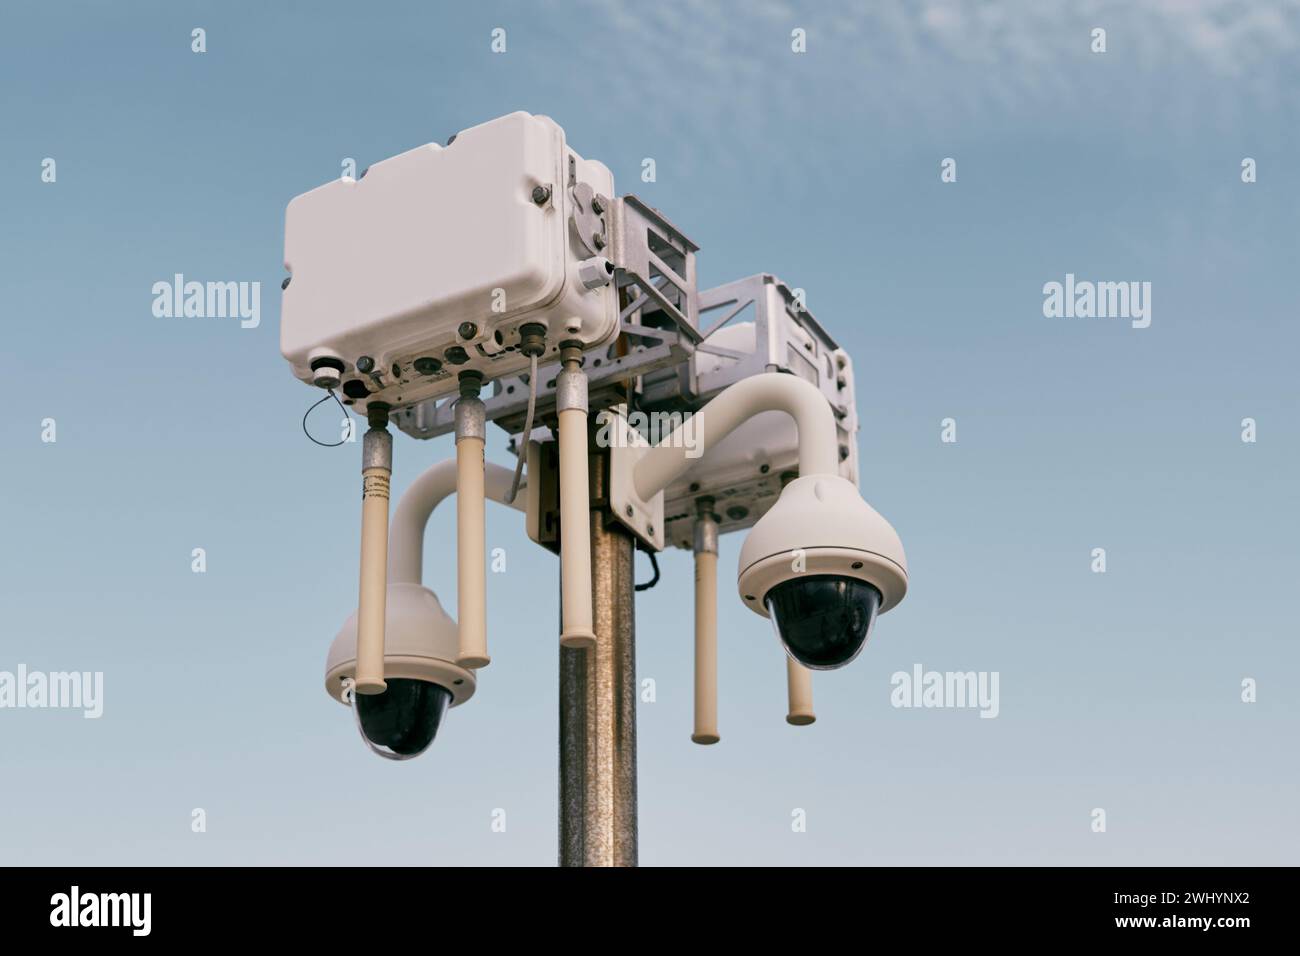 Street wi-fi router on a pole with video cameras against the sky Stock Photo